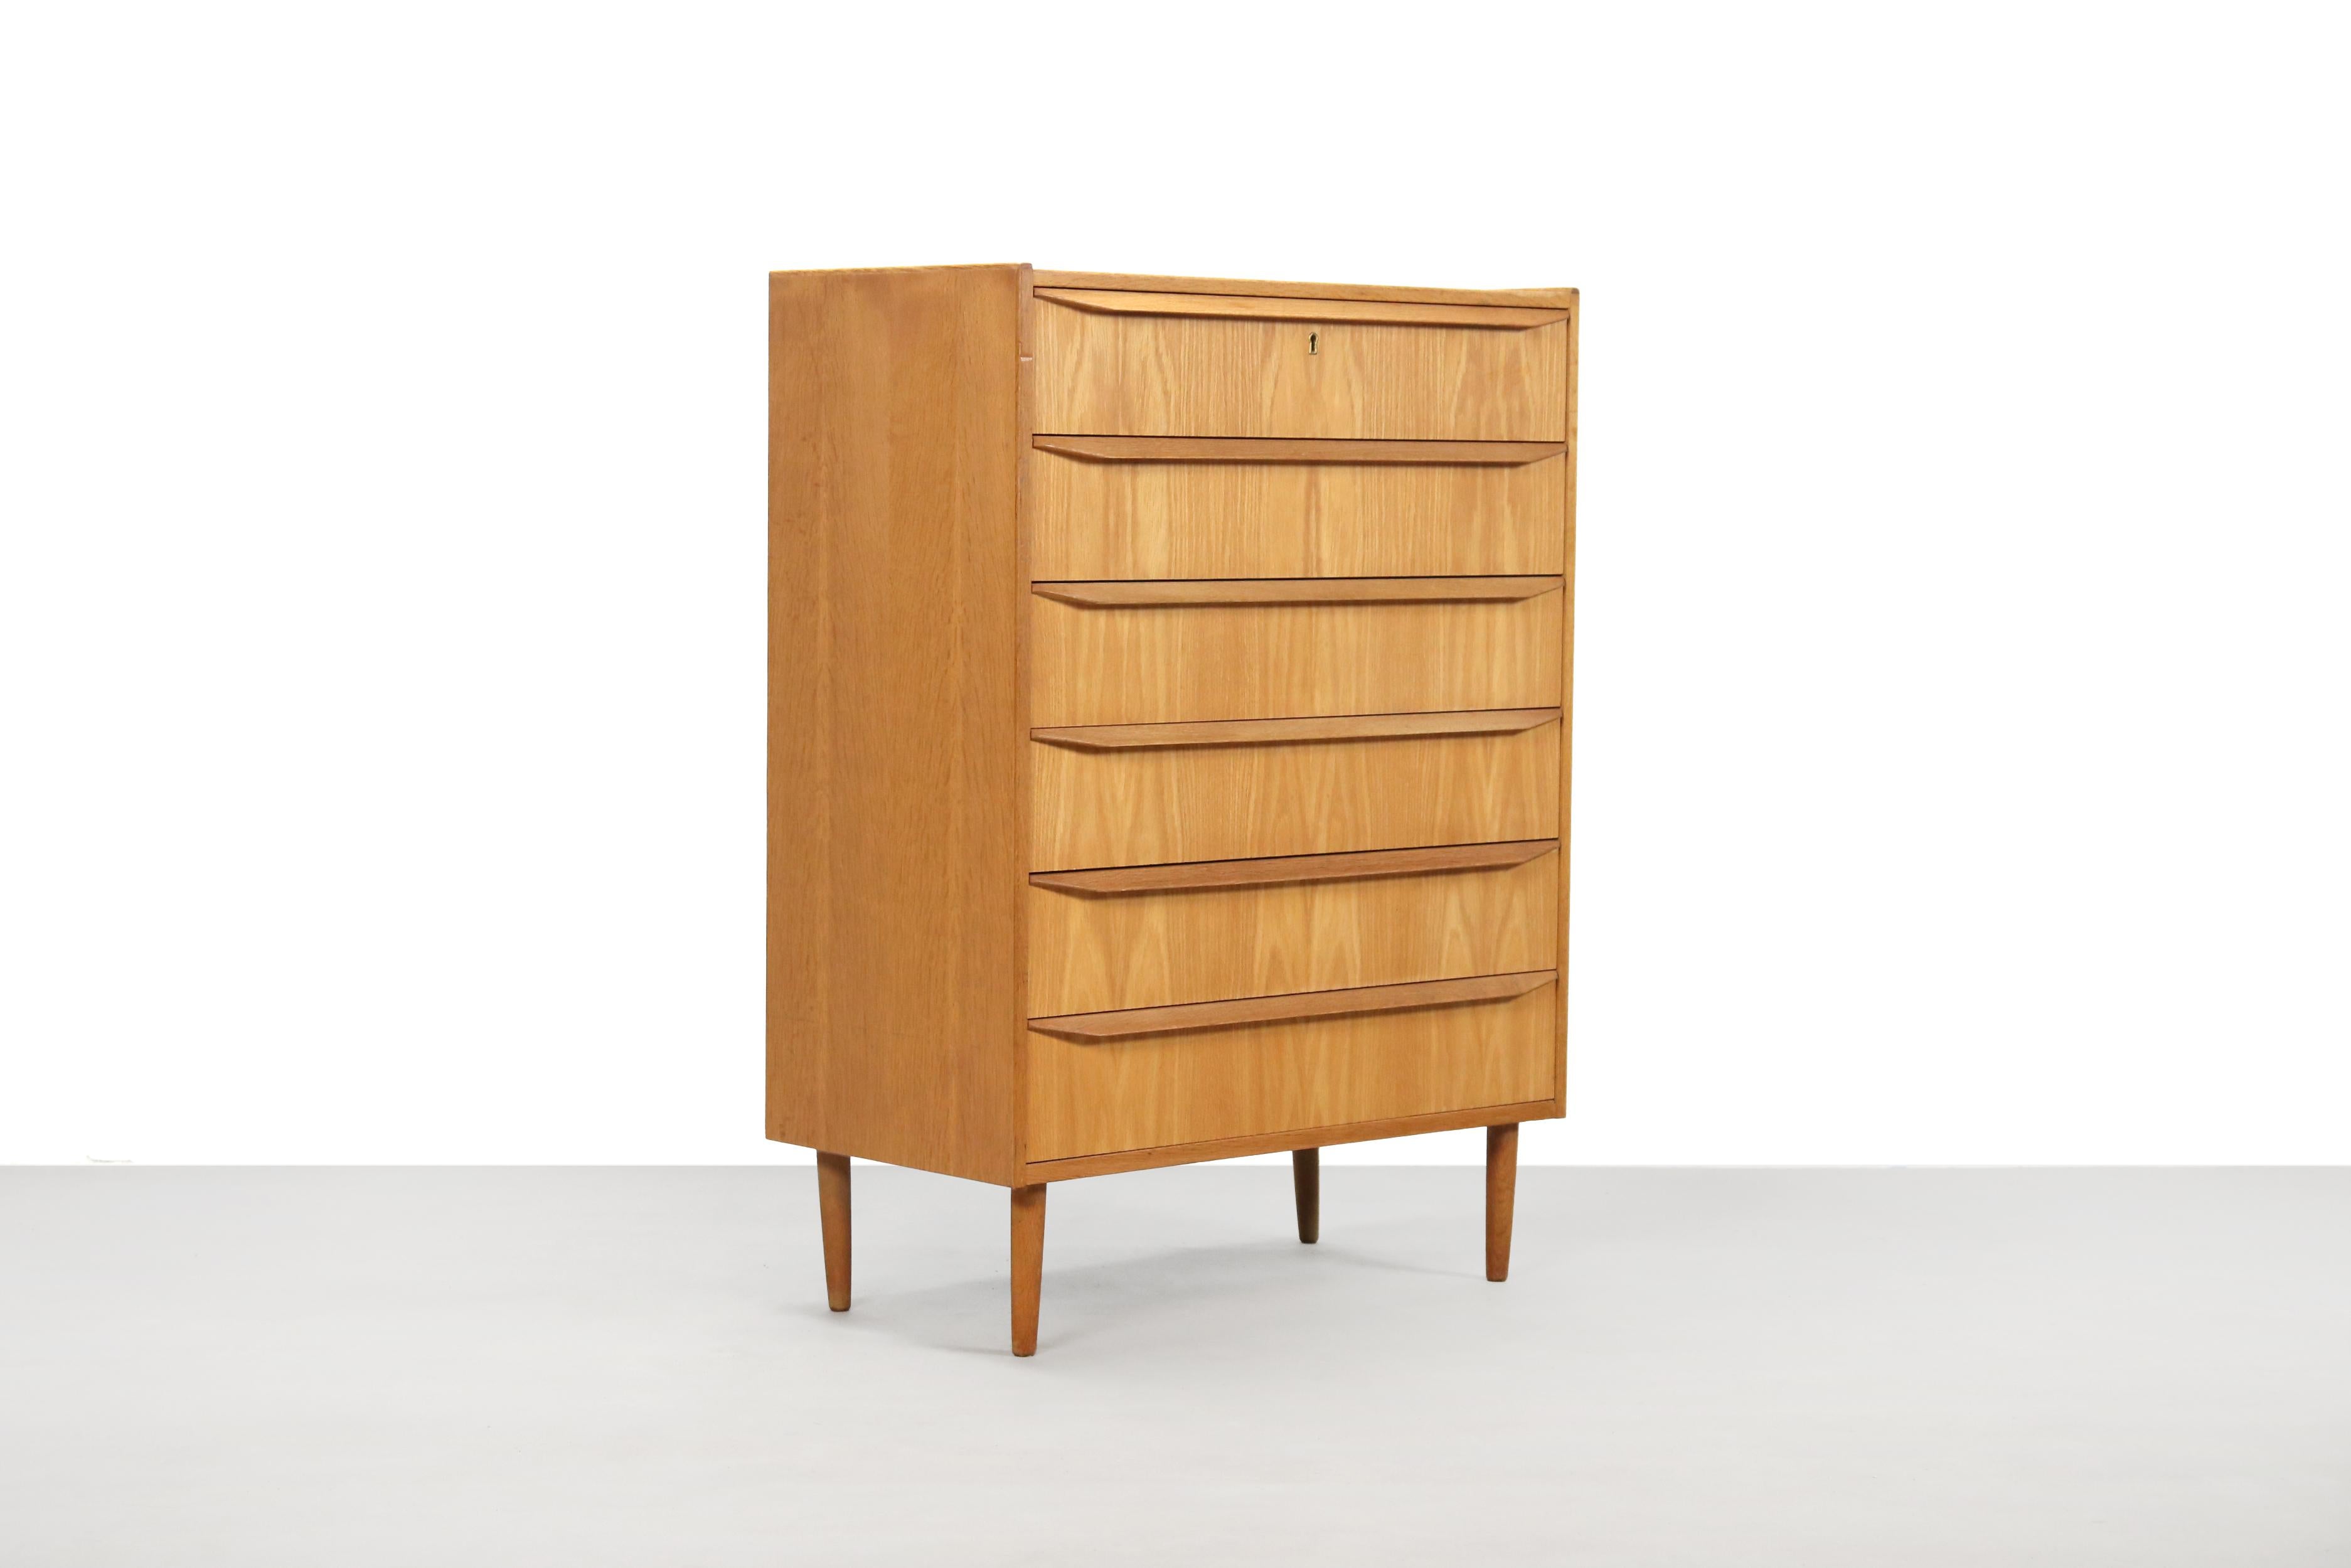 Danish modern design chest of drawers with 6 drawers. Made of oak wood with beautiful continuous handles across the width of the drawers. This chest of drawers comes from the 1970s from Denmark. Use this cabinet in the hallway, in the bedroom for